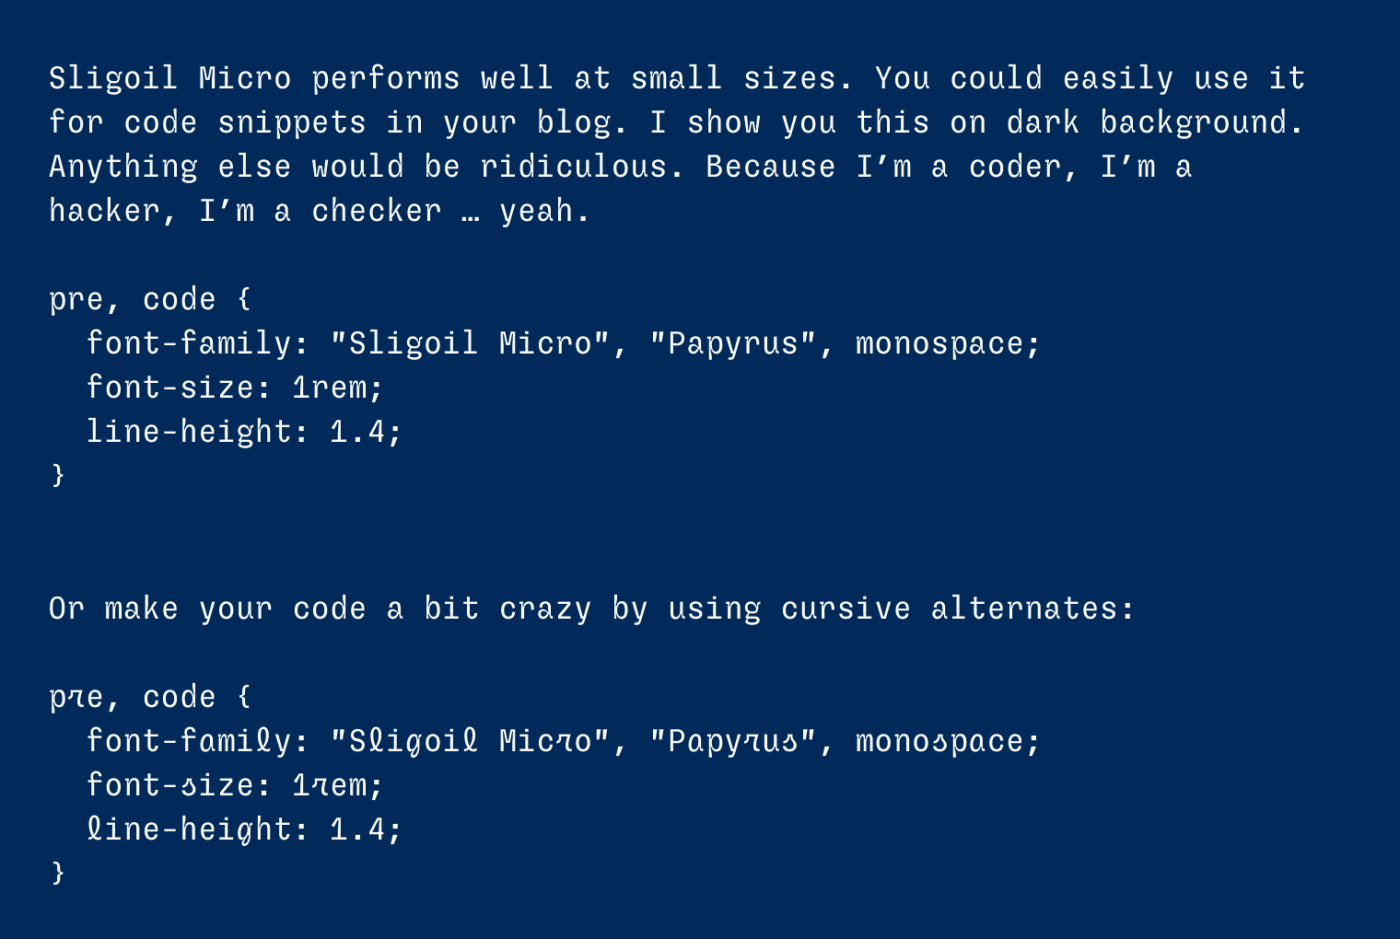 Sligoil Micro performs well at small sizes. You could easily use it for code snippets in your blog. I show you this on dark background. Anything else would be ridiculous. Because I’m a coder, I’m a hacker, I’m a checker … yeah.  pre, code {   font-family: "Sligoil Micro", "Papyrus", monospace;   font-size: 1rem;   line-height: 1.4; }   Or make your code a bit crazy by using cursive alternates:  pre, code {   font-family: "Sligoil Micro", "Papyrus", monospace;   font-size: 1rem;   line-height: 1.4; }